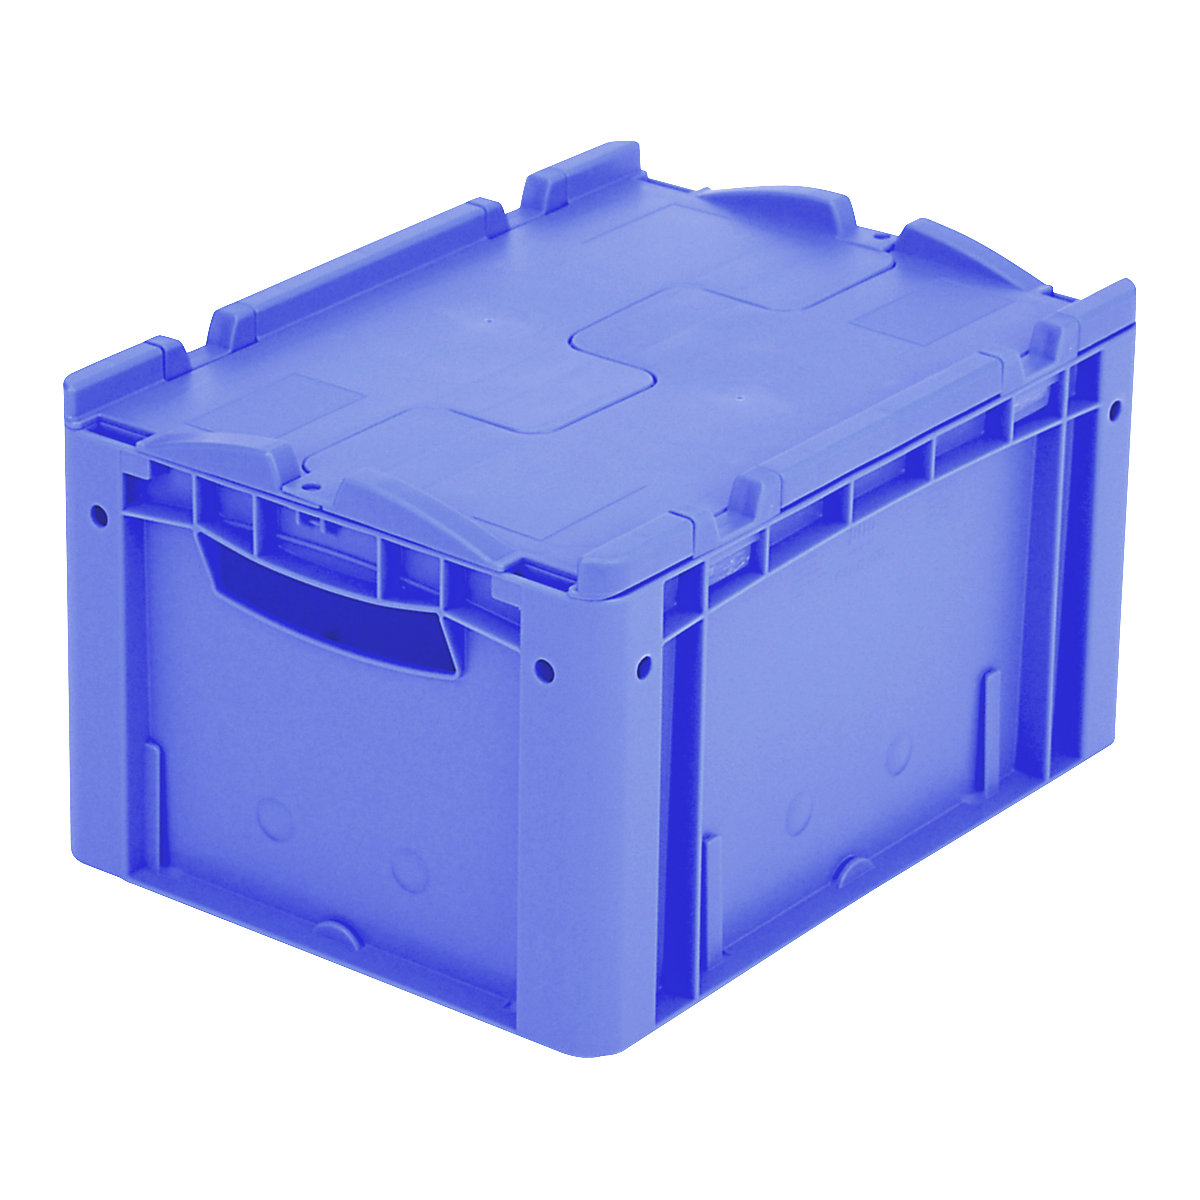 XL Euro stacking container – BITO, with 2-section hinged lid, LxWxH 400 x 300 x 238 mm-13